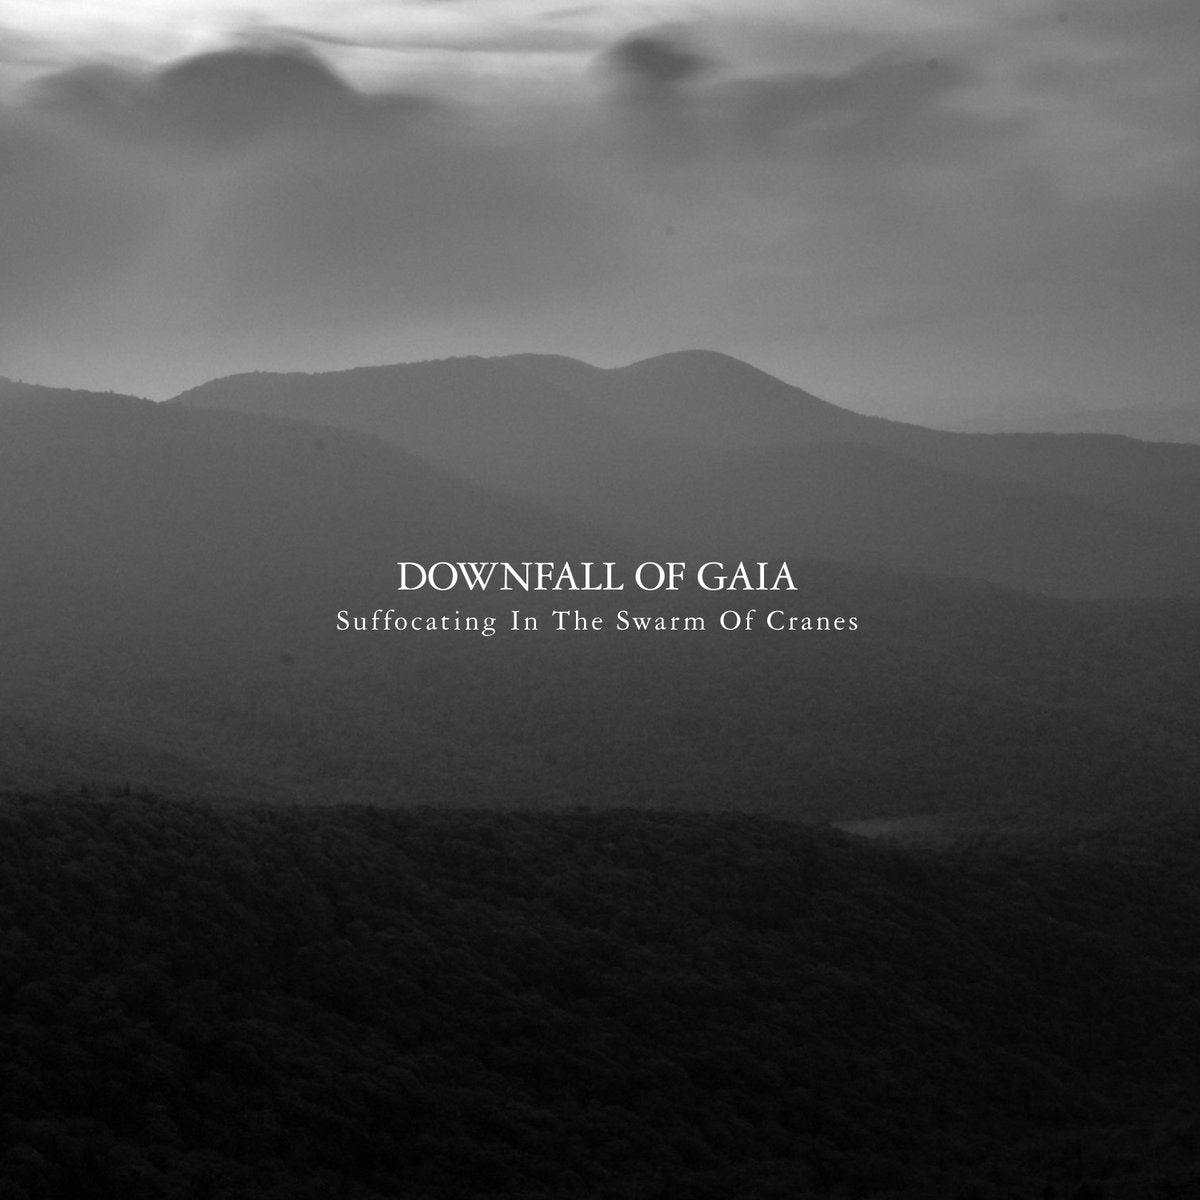 DOWNFALL OF GAIA "Suffocating In The Swarm Of Cranes" 2xLP